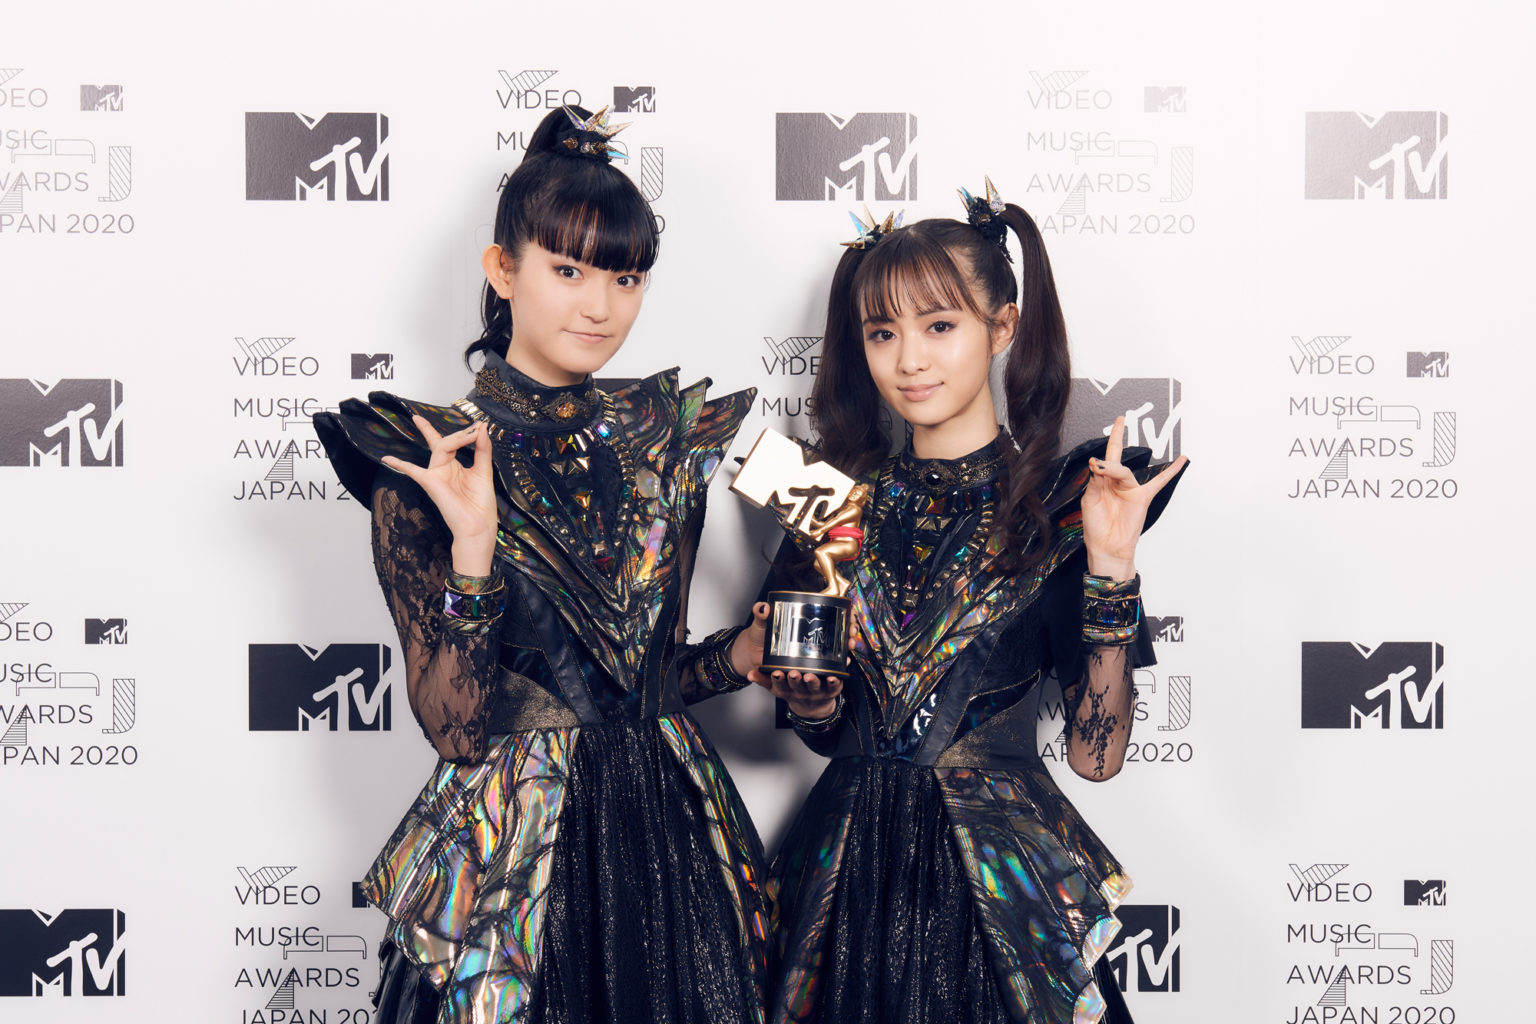 Last Night Babymetal Received Their Award And Performed At The Vmajs